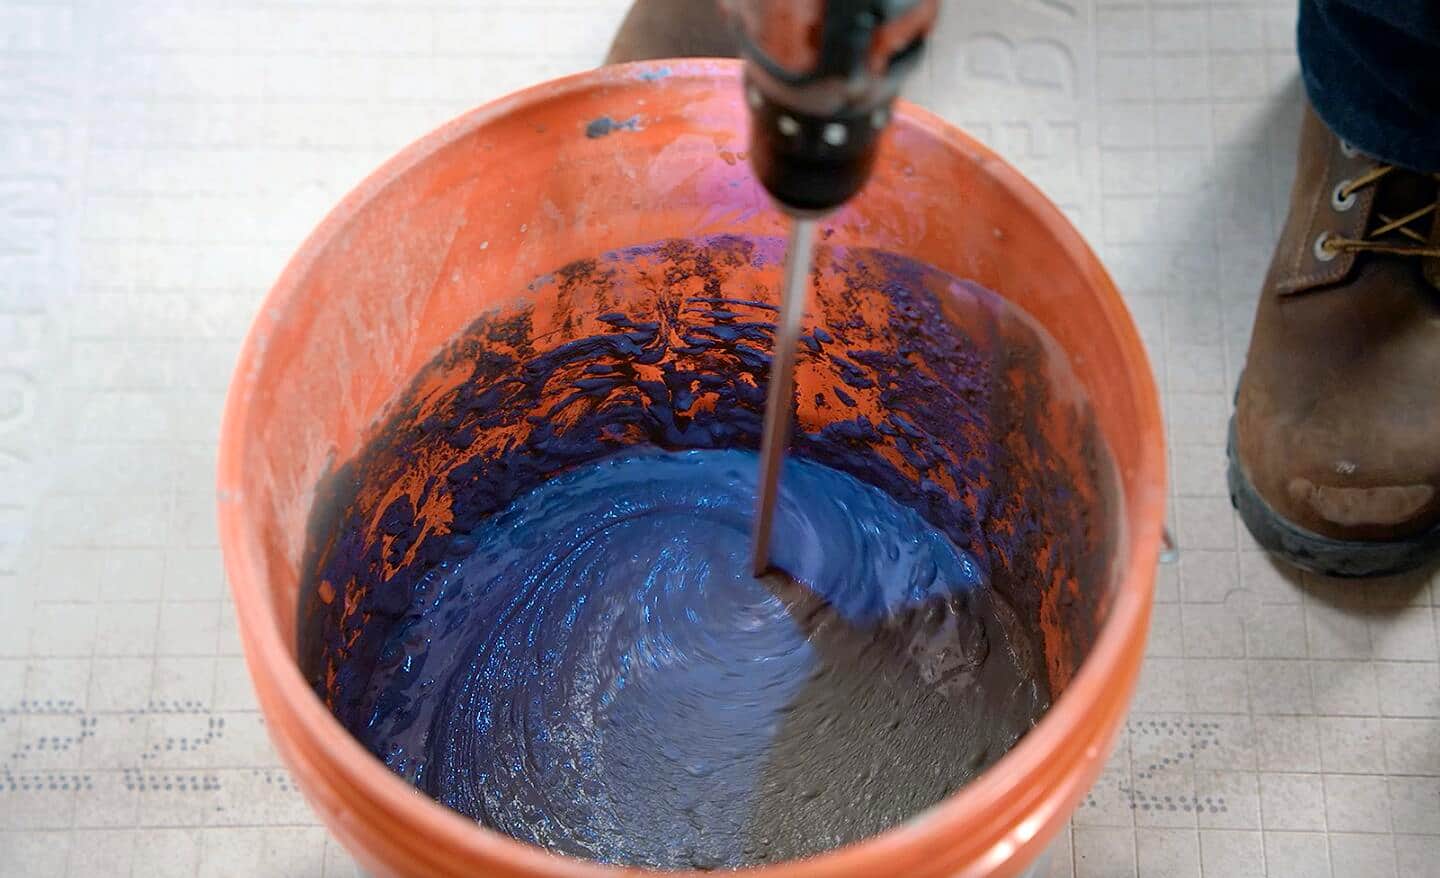 A person mixes grout mortar in a bucket.